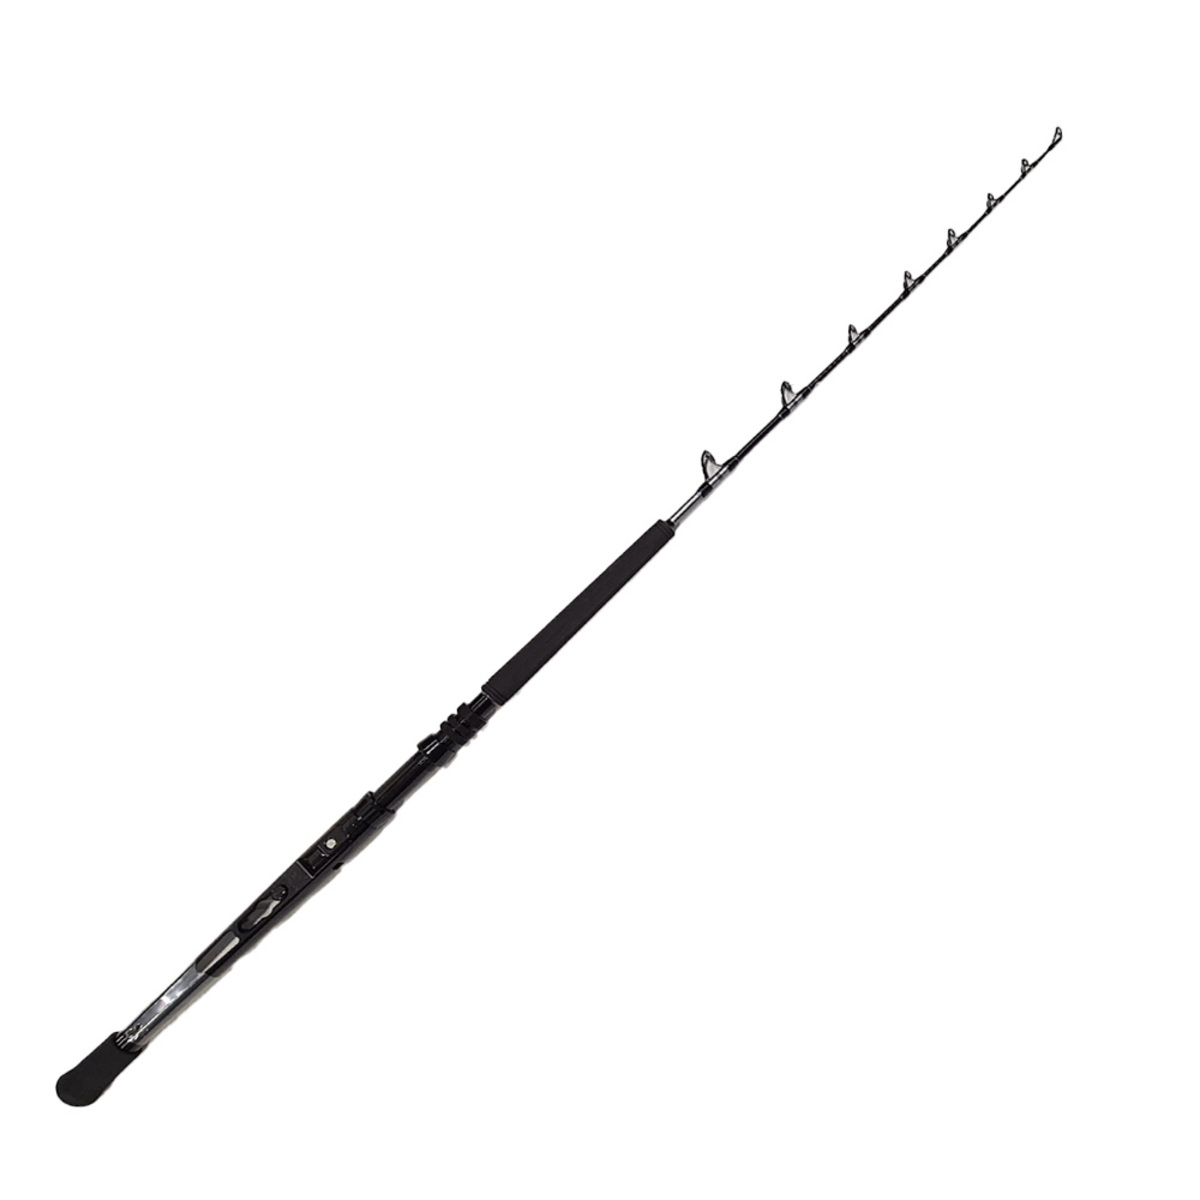 Abyss Sw Overhead Game Rod 5'6 60-100Lb With Adjustable Butt